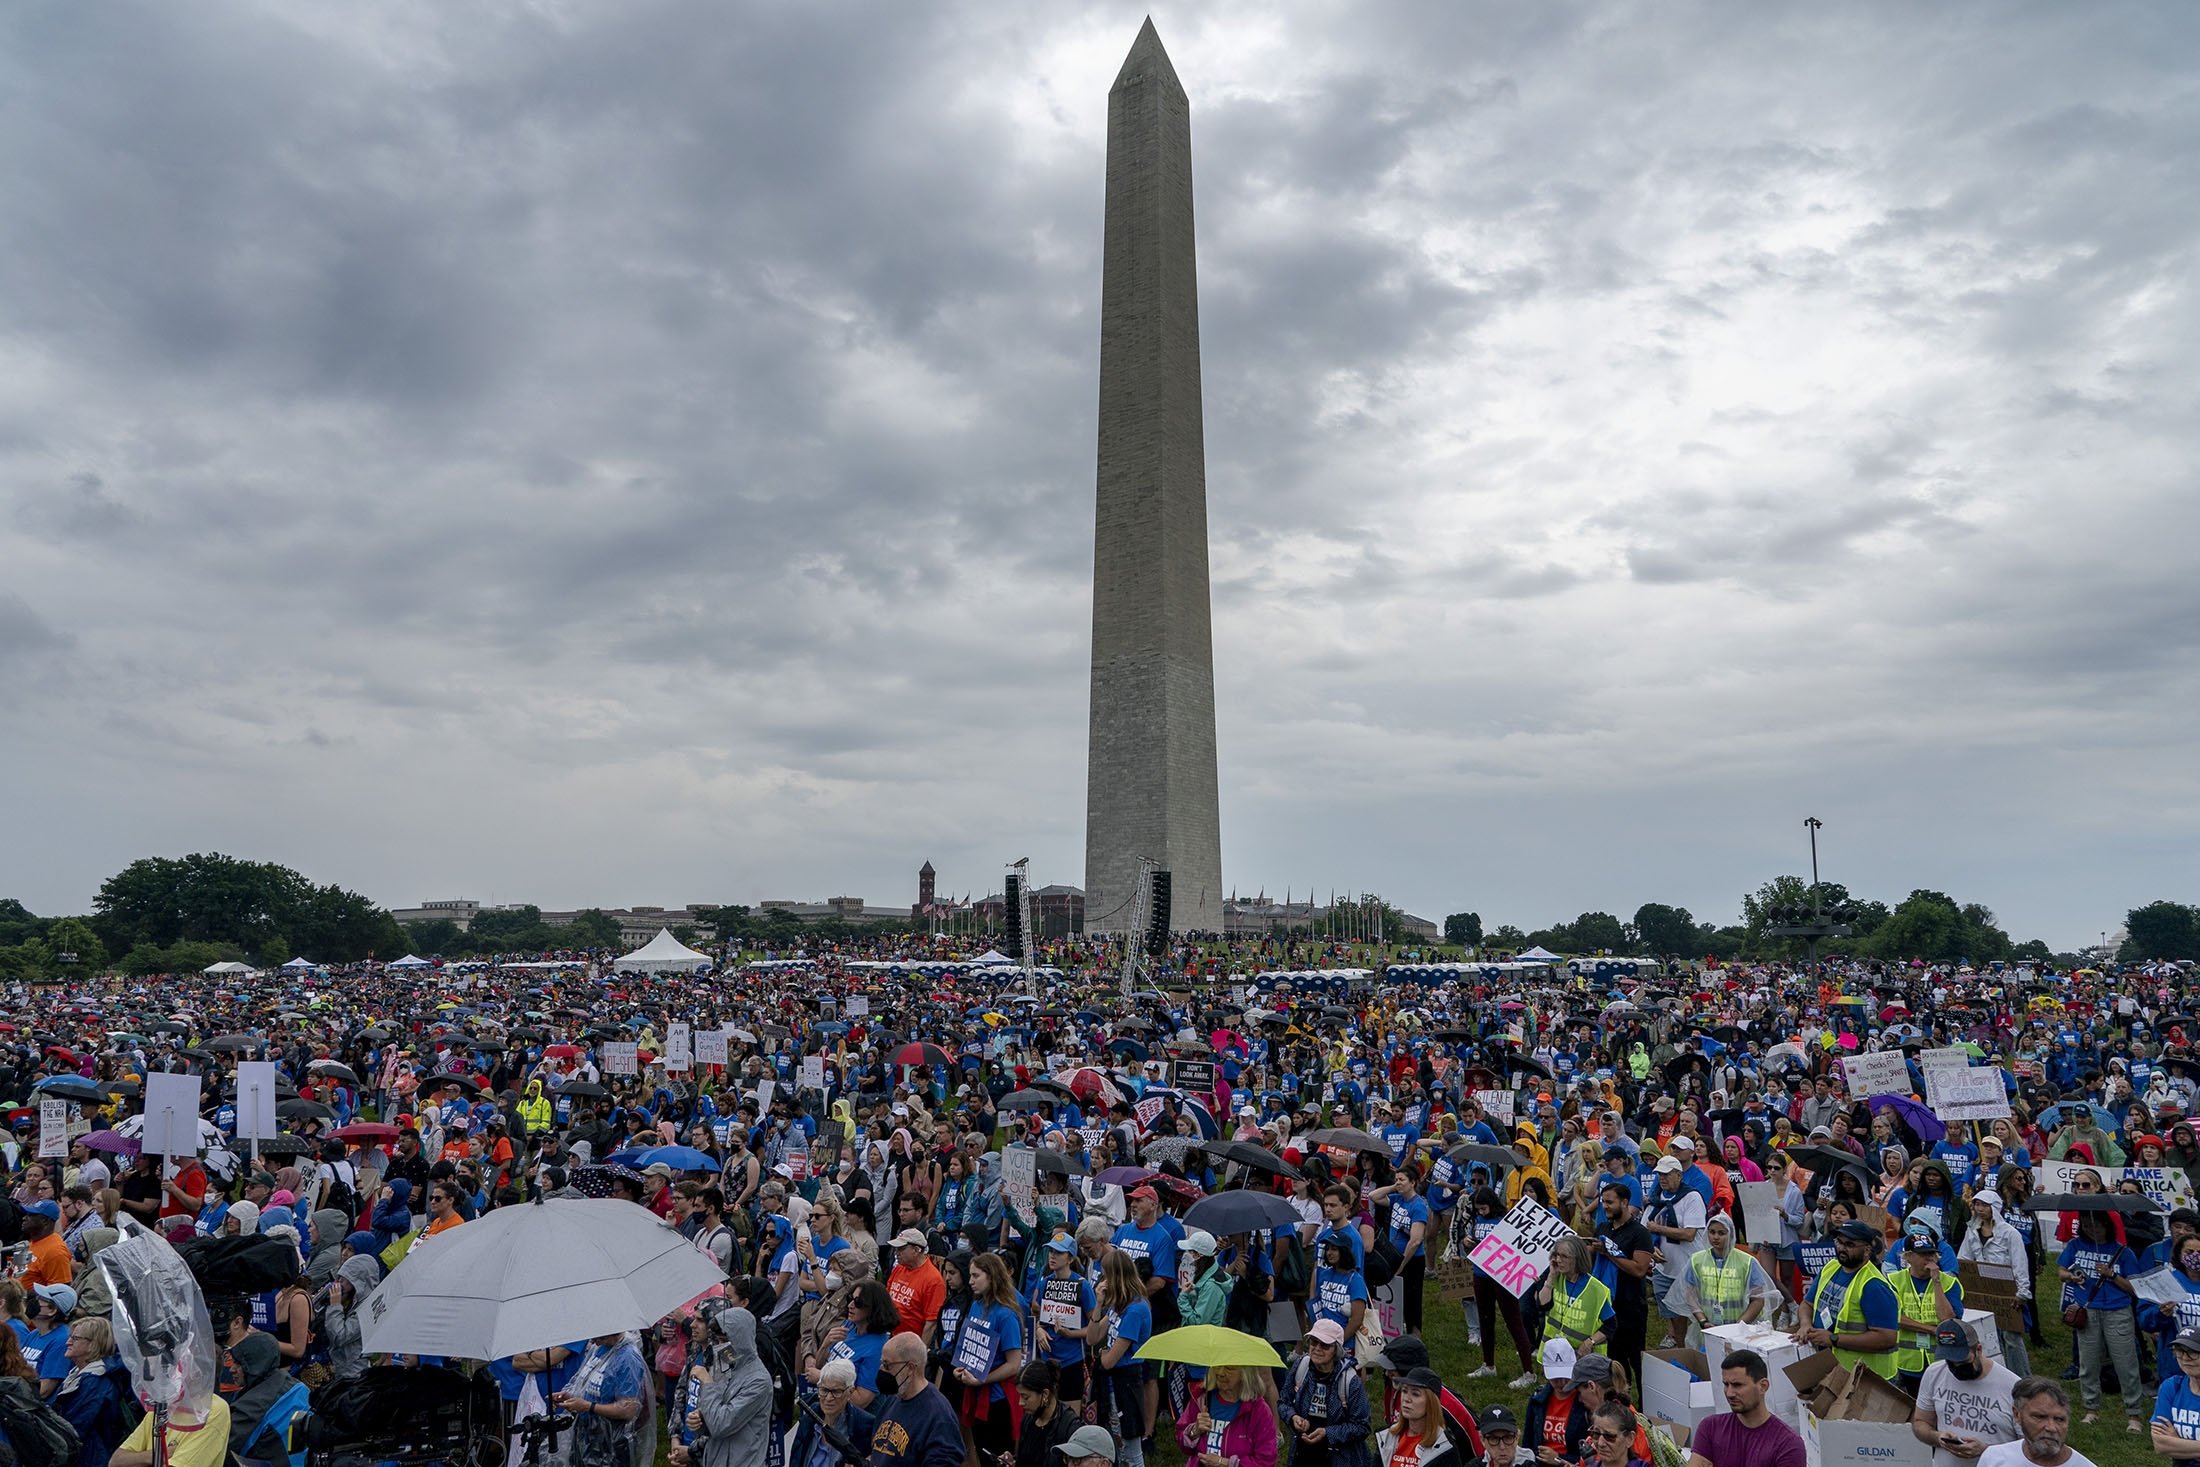 People participate in the second March for Our Lives rally in support of gun control in front of the Washington Monument, in Washington, U.S., June 11, 2022. (AP Photo)